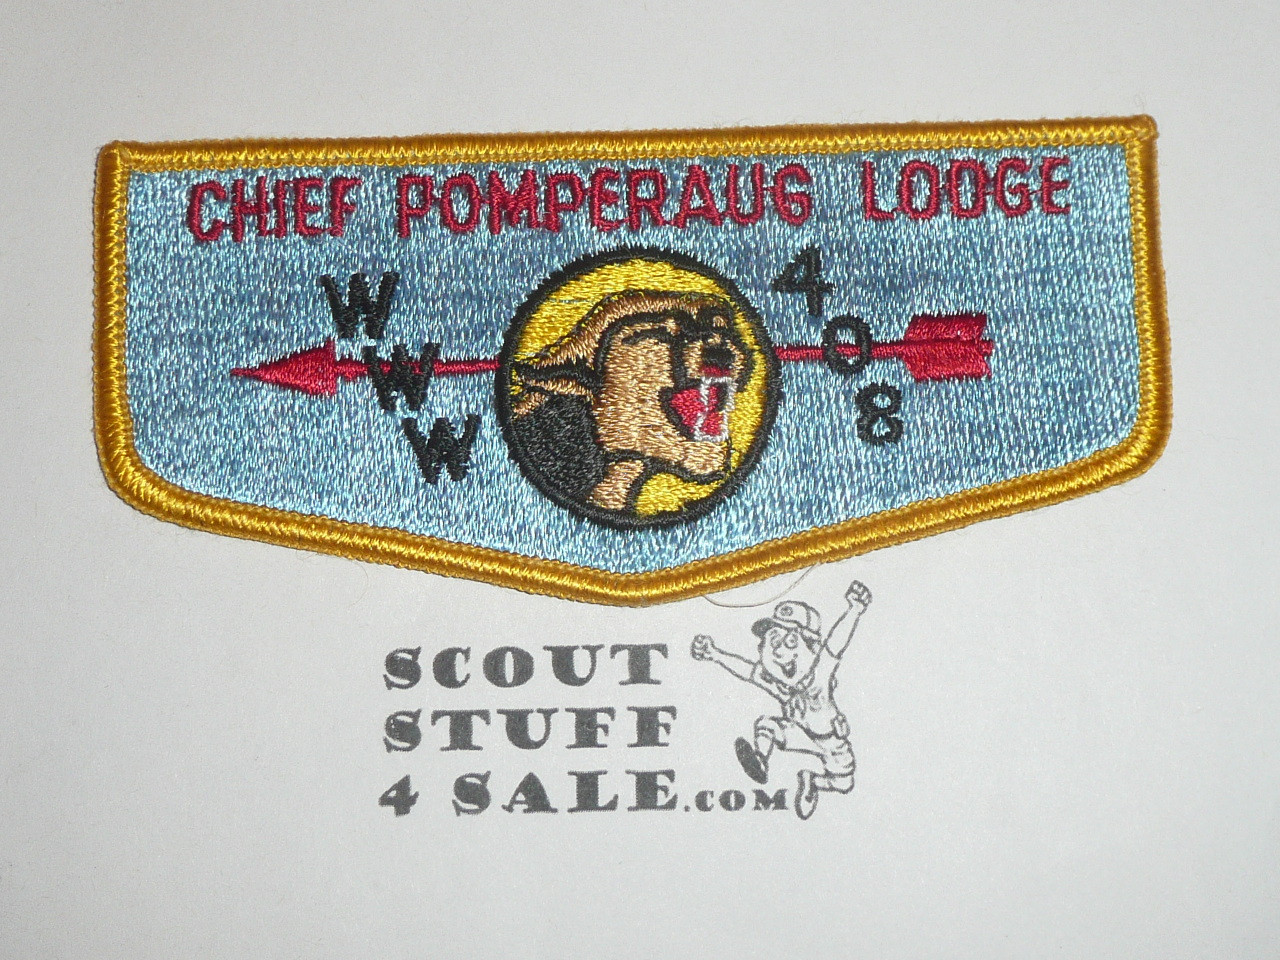 Order of the Arrow Lodge #408 Chief Pomperaug s2 Flap Patch